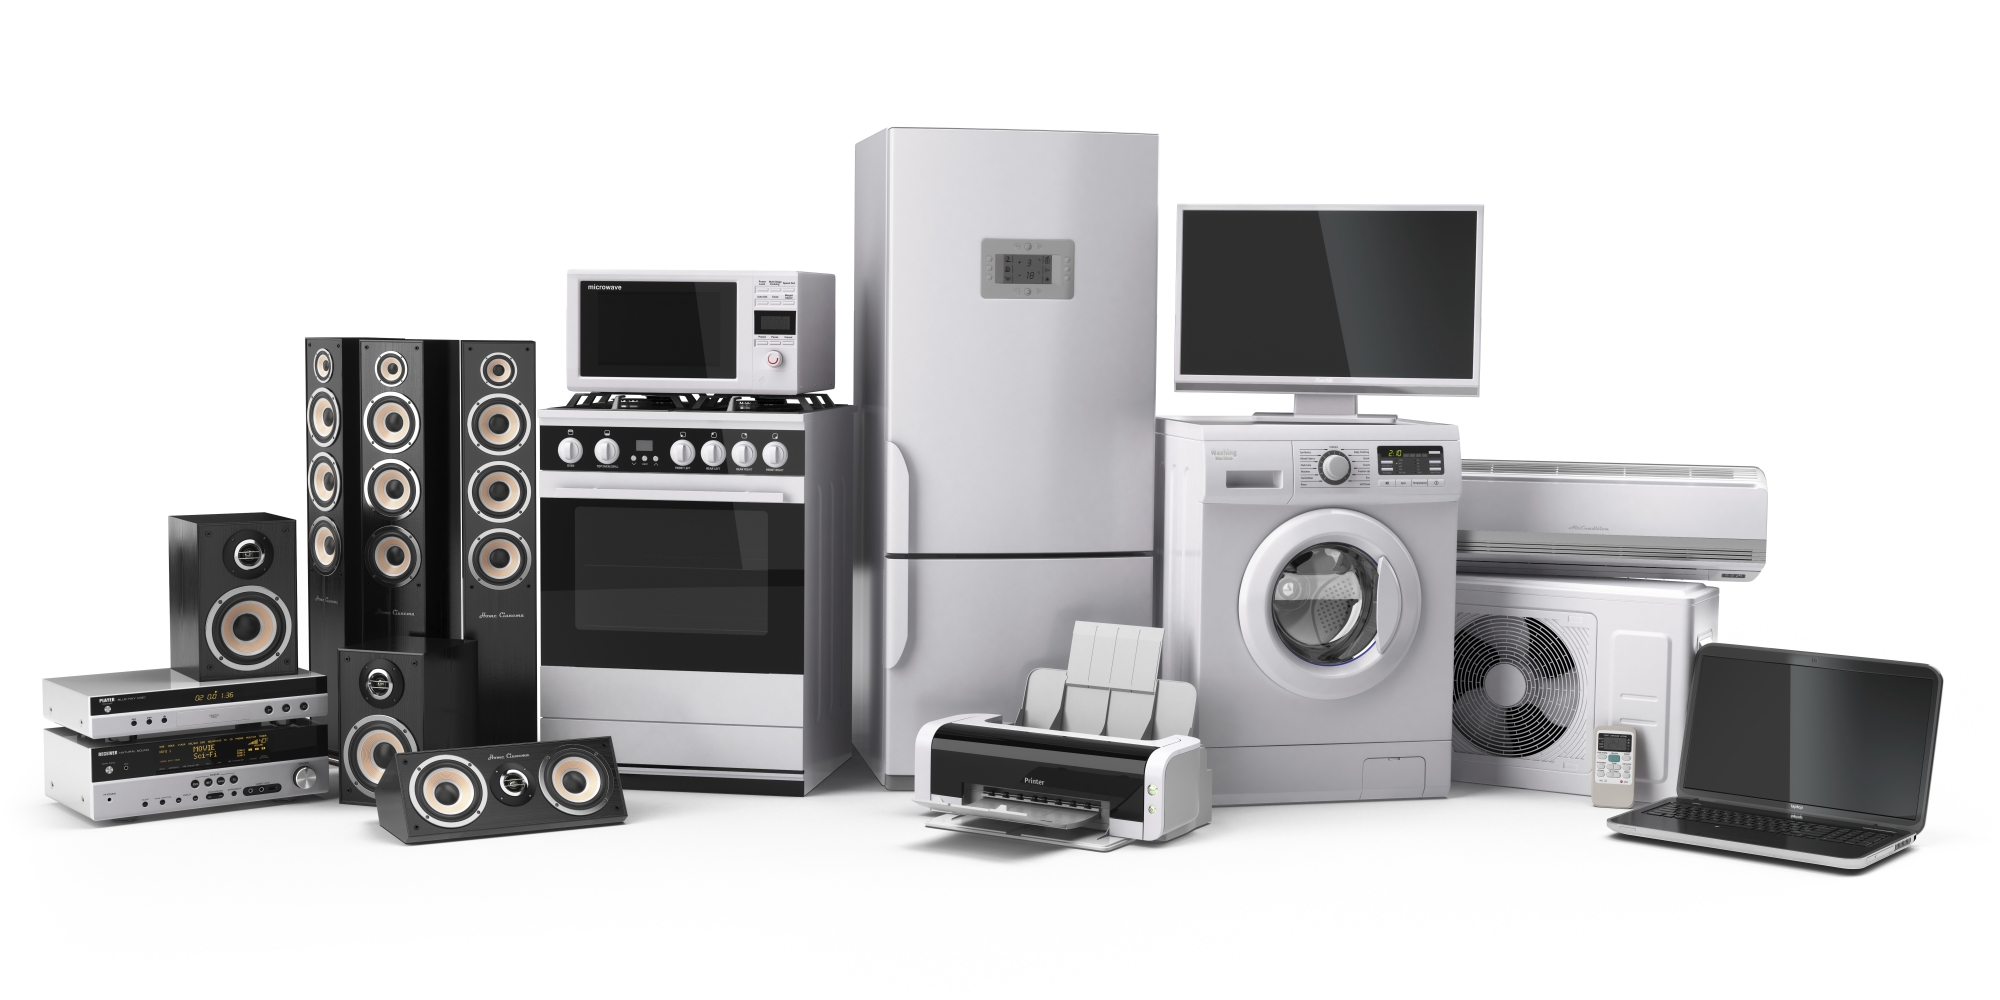 The Need for Home Appliances to Consider